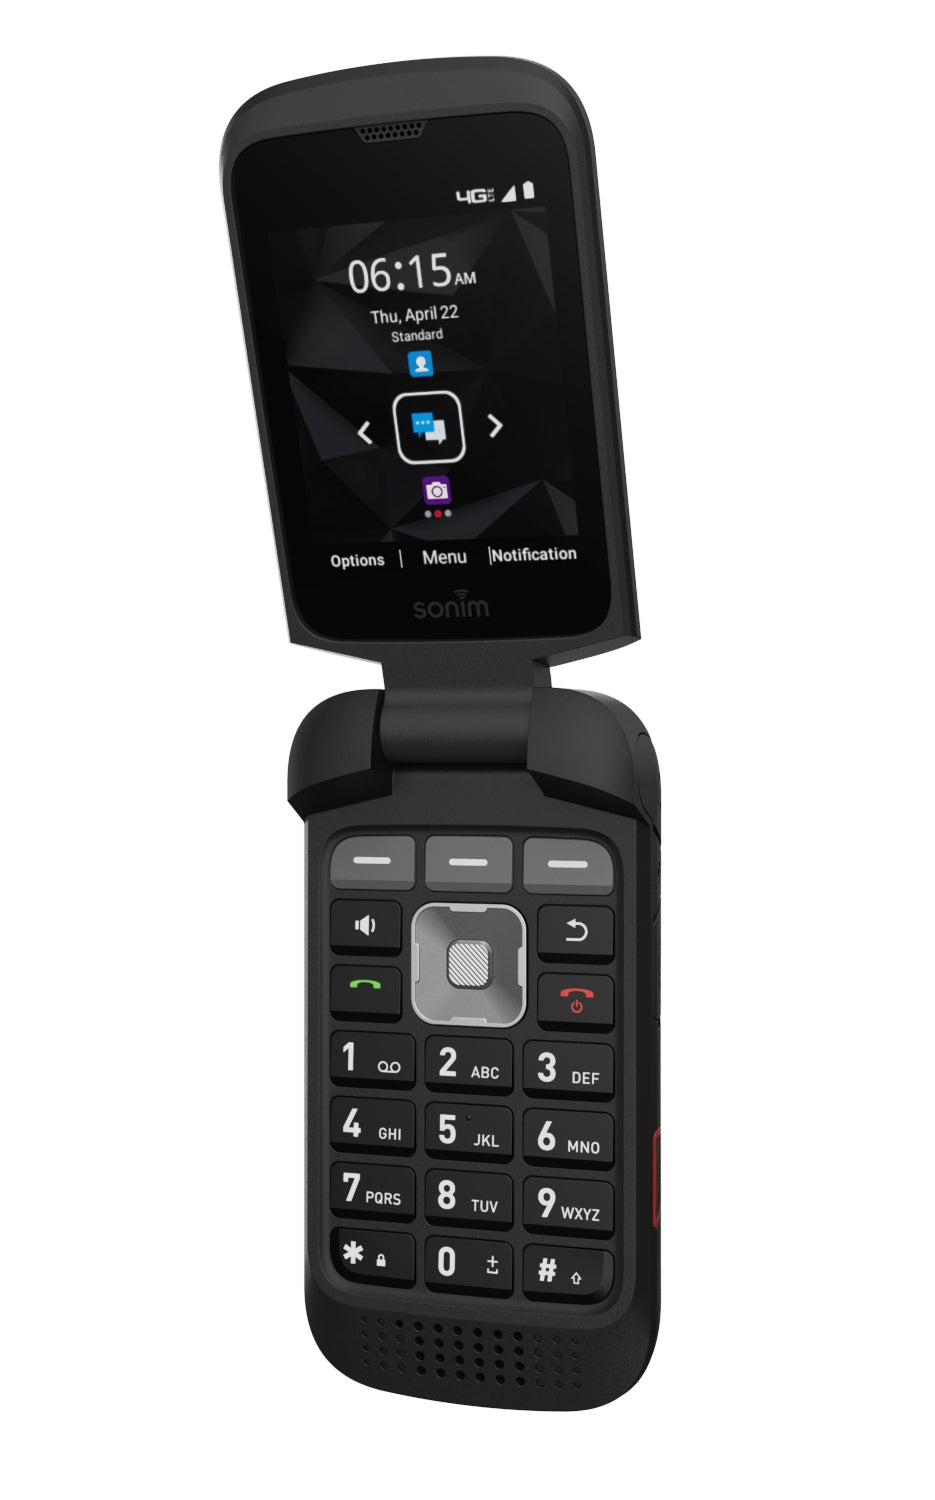 Sonim XP3 (US Cellular Carrier Only)